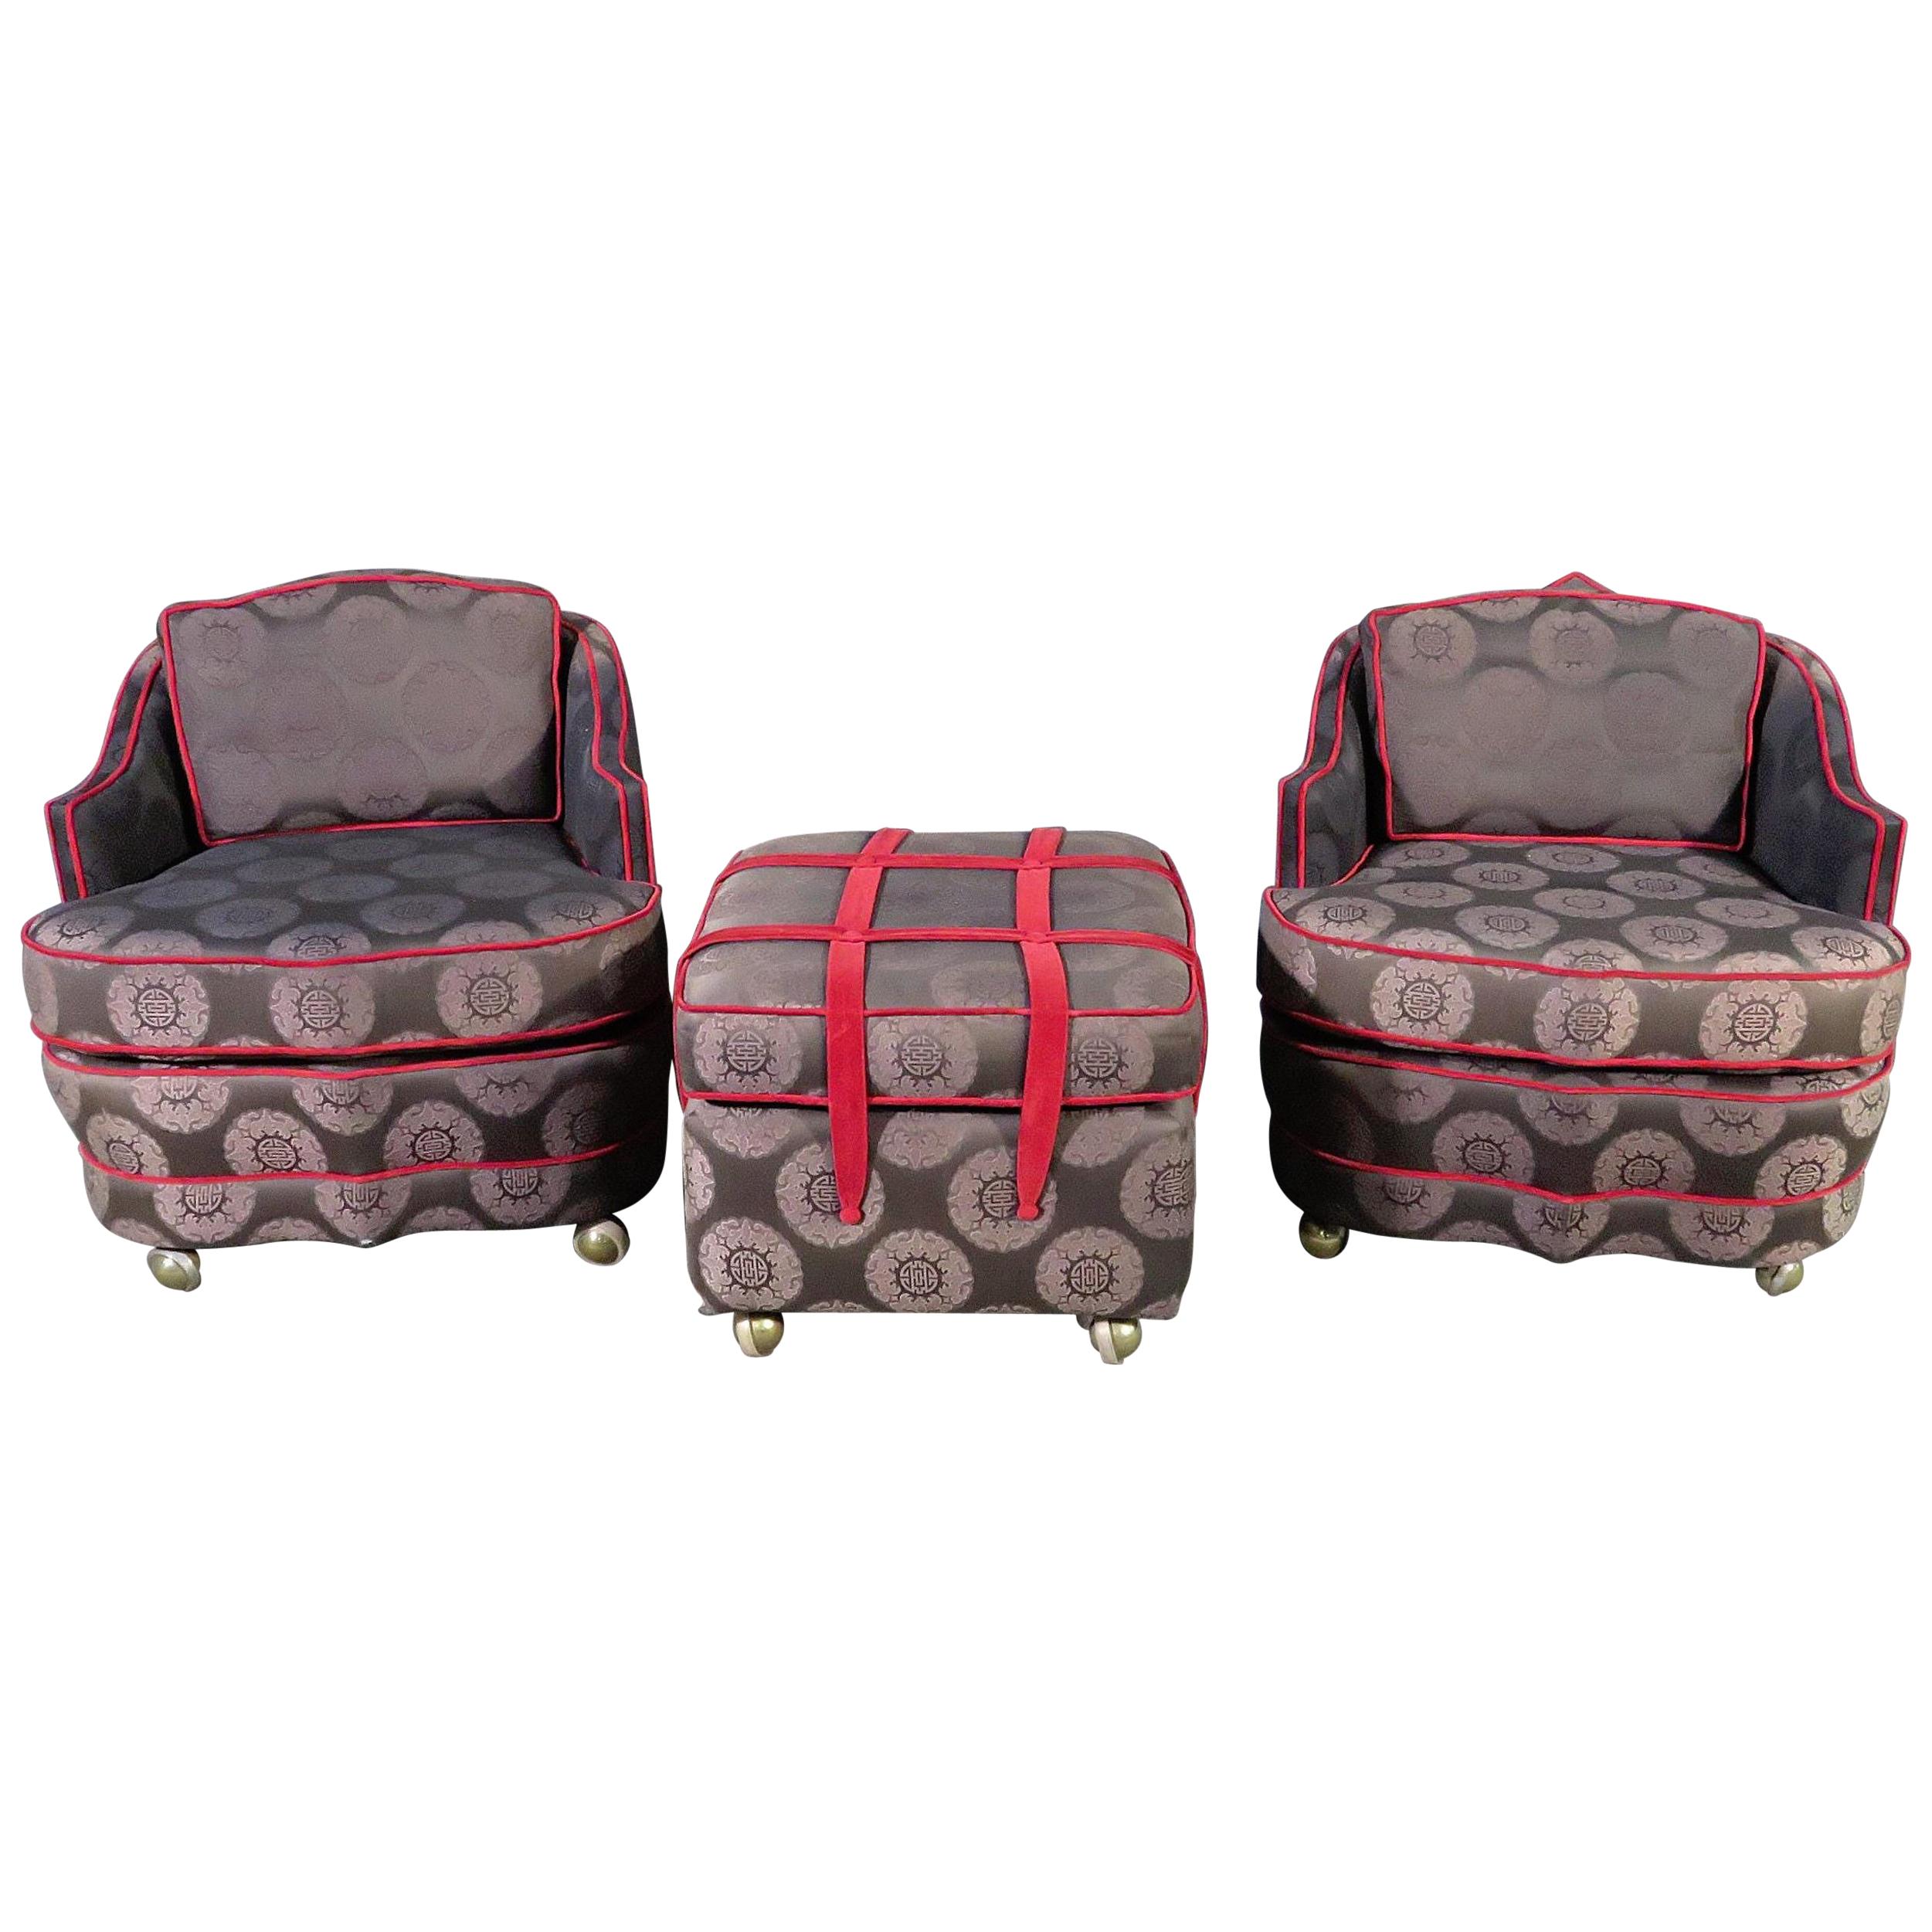 Pair of Decorator Chairs & Ottoman